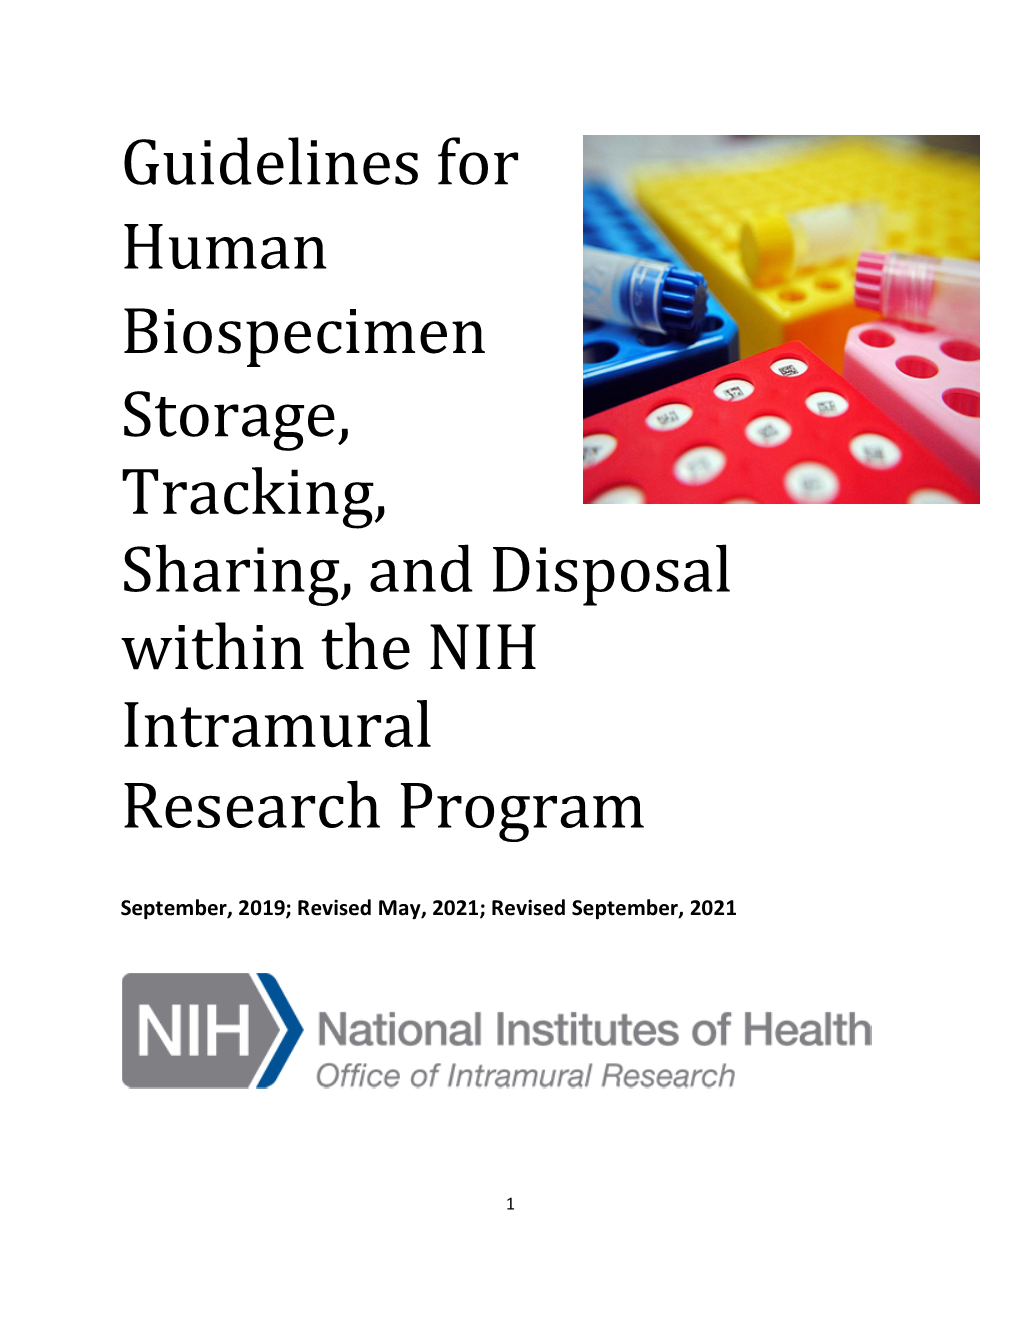 Guidelines for Human Biospecimens Storage and Tracking 12913